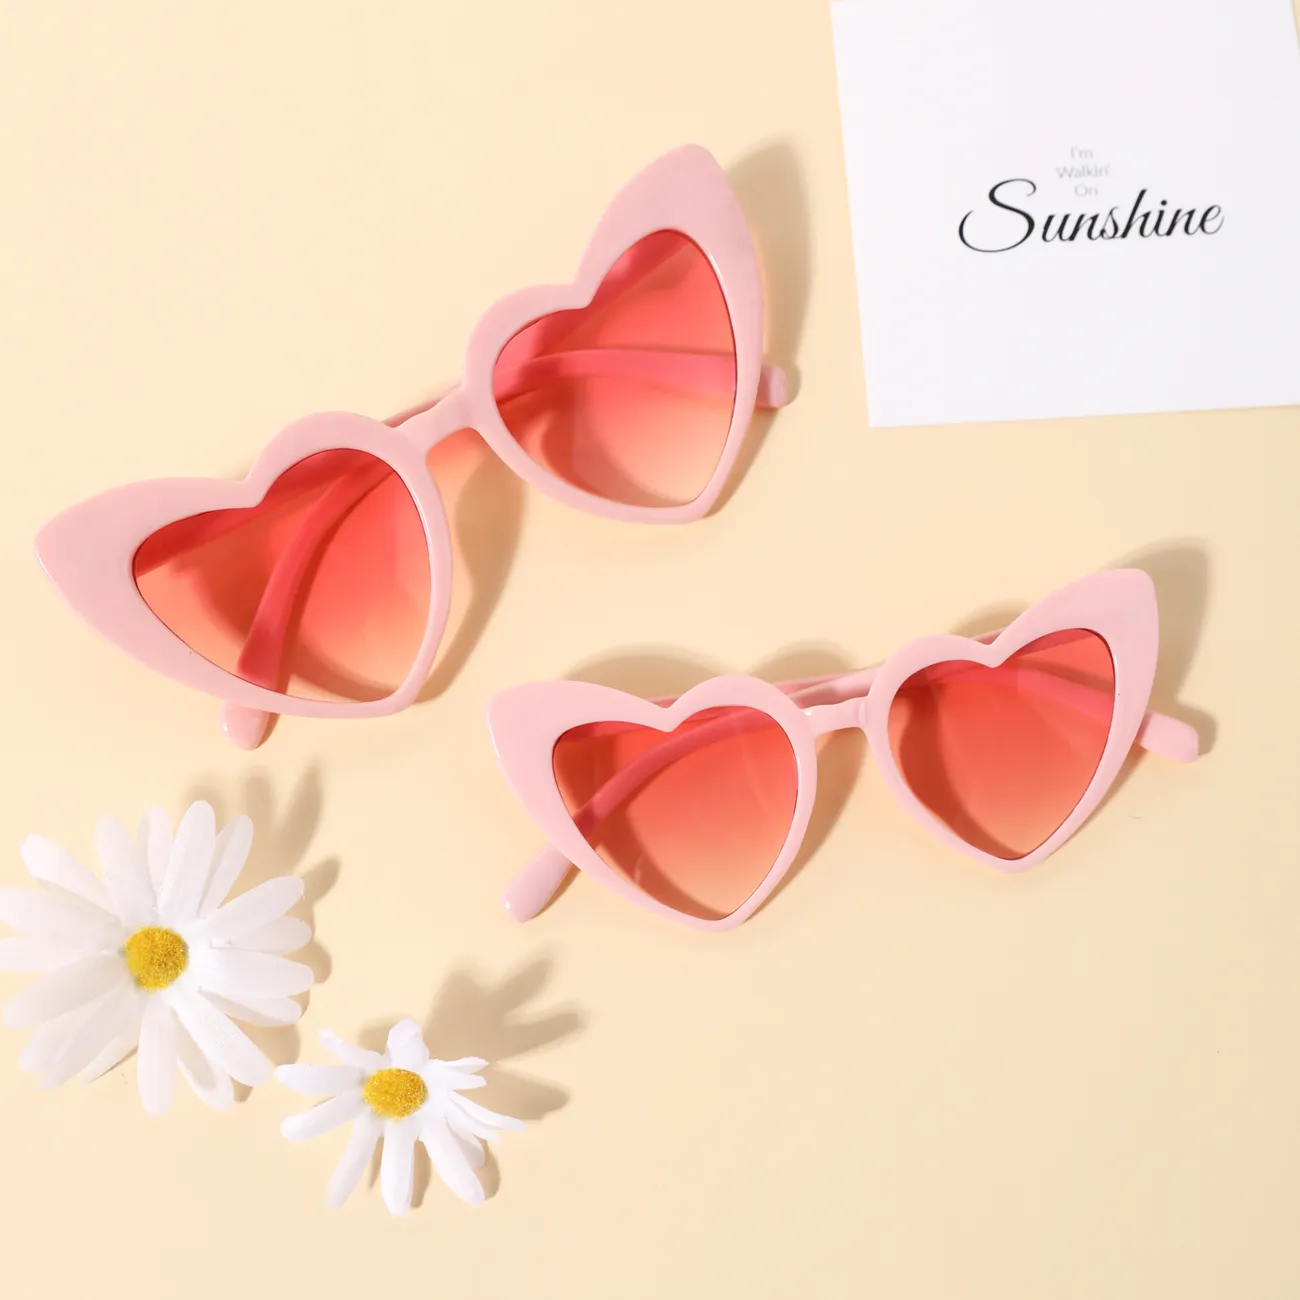 Peach Heart Frame Decorative Glasses for Mom and Me (With Glasses Bag) Pink big image 1